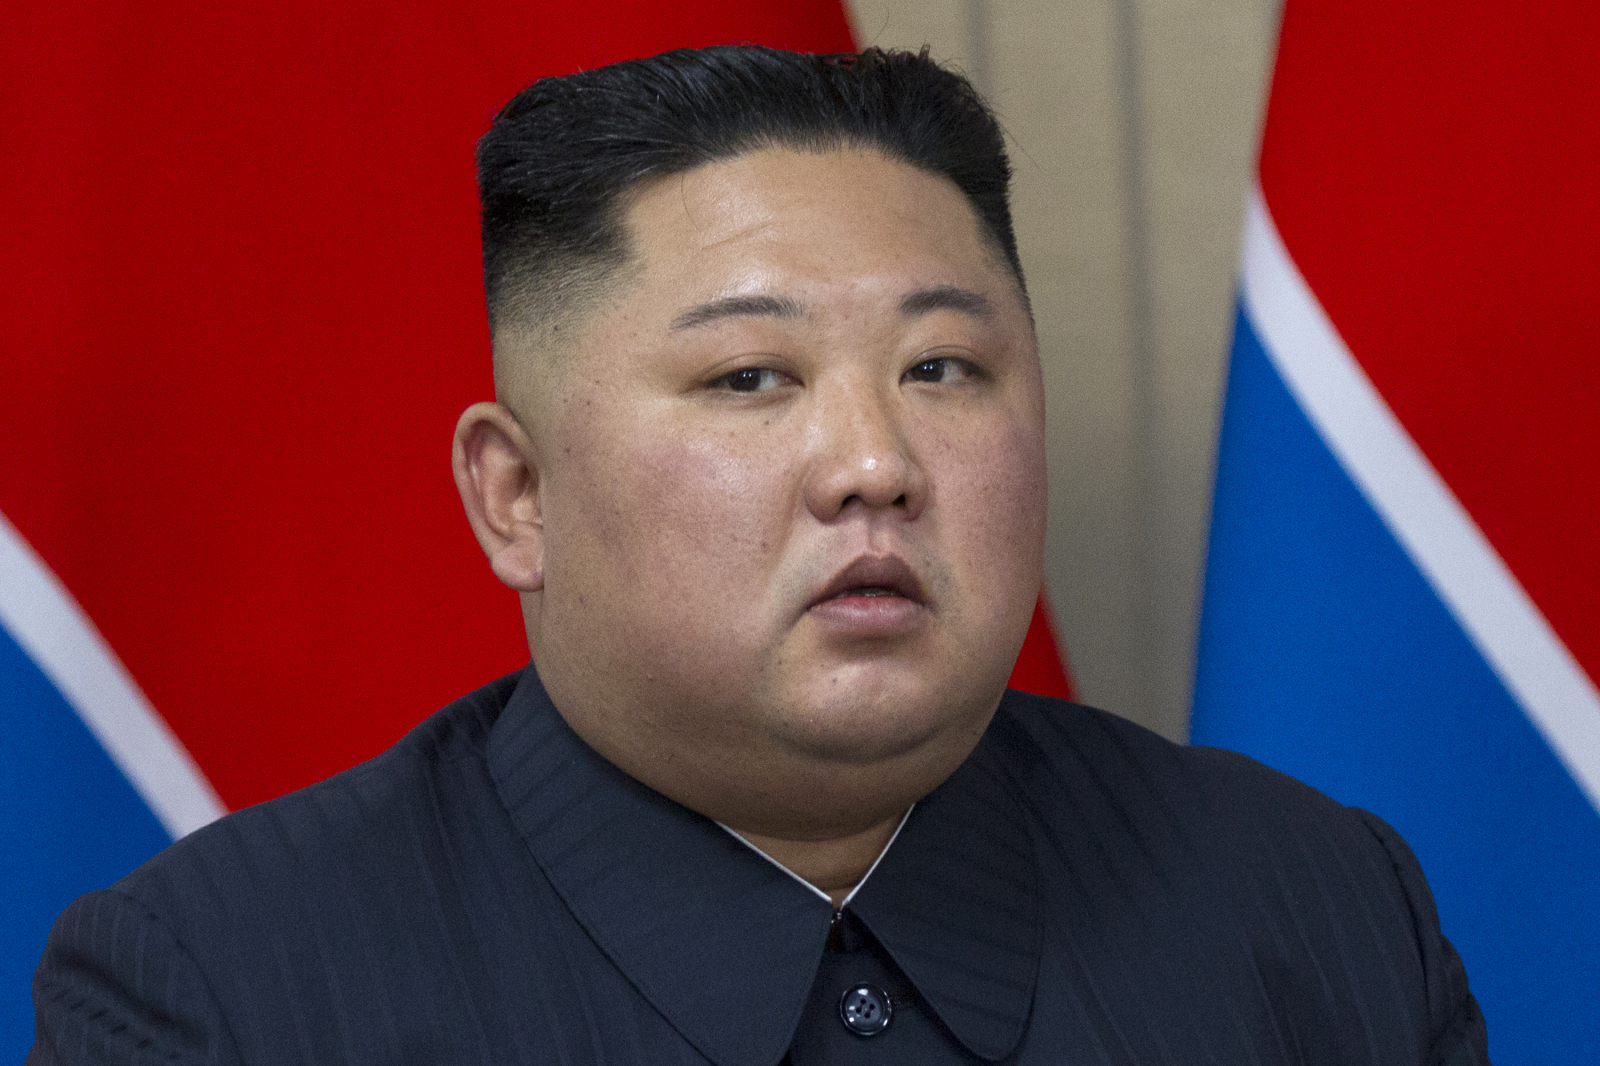 Kim Jong Un's 'Infidel' Hairstyle A Fashion Sin Under New Taliban Rules